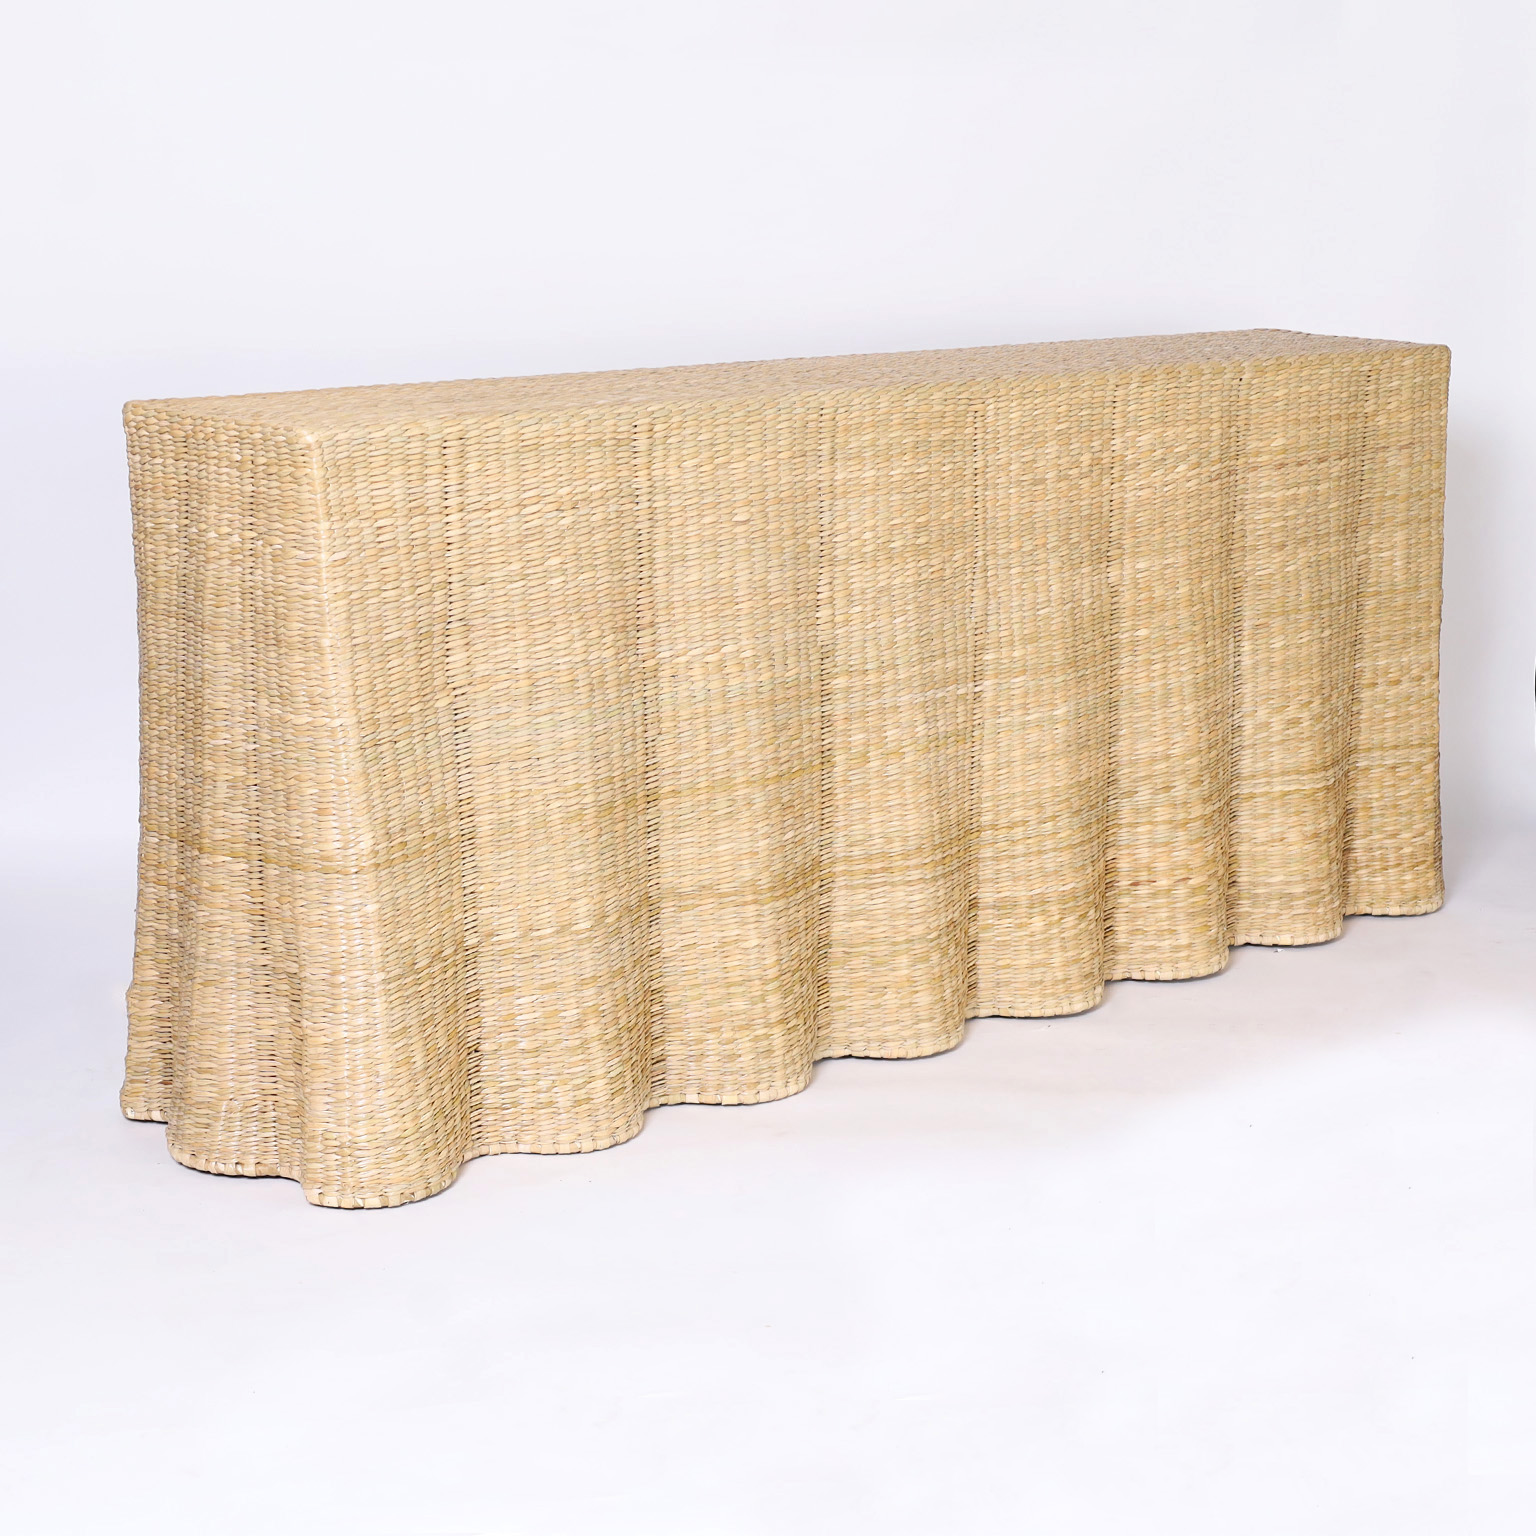 The Bora Bora Long Wicker Drapery Ghost Console from the FS Flores Collection